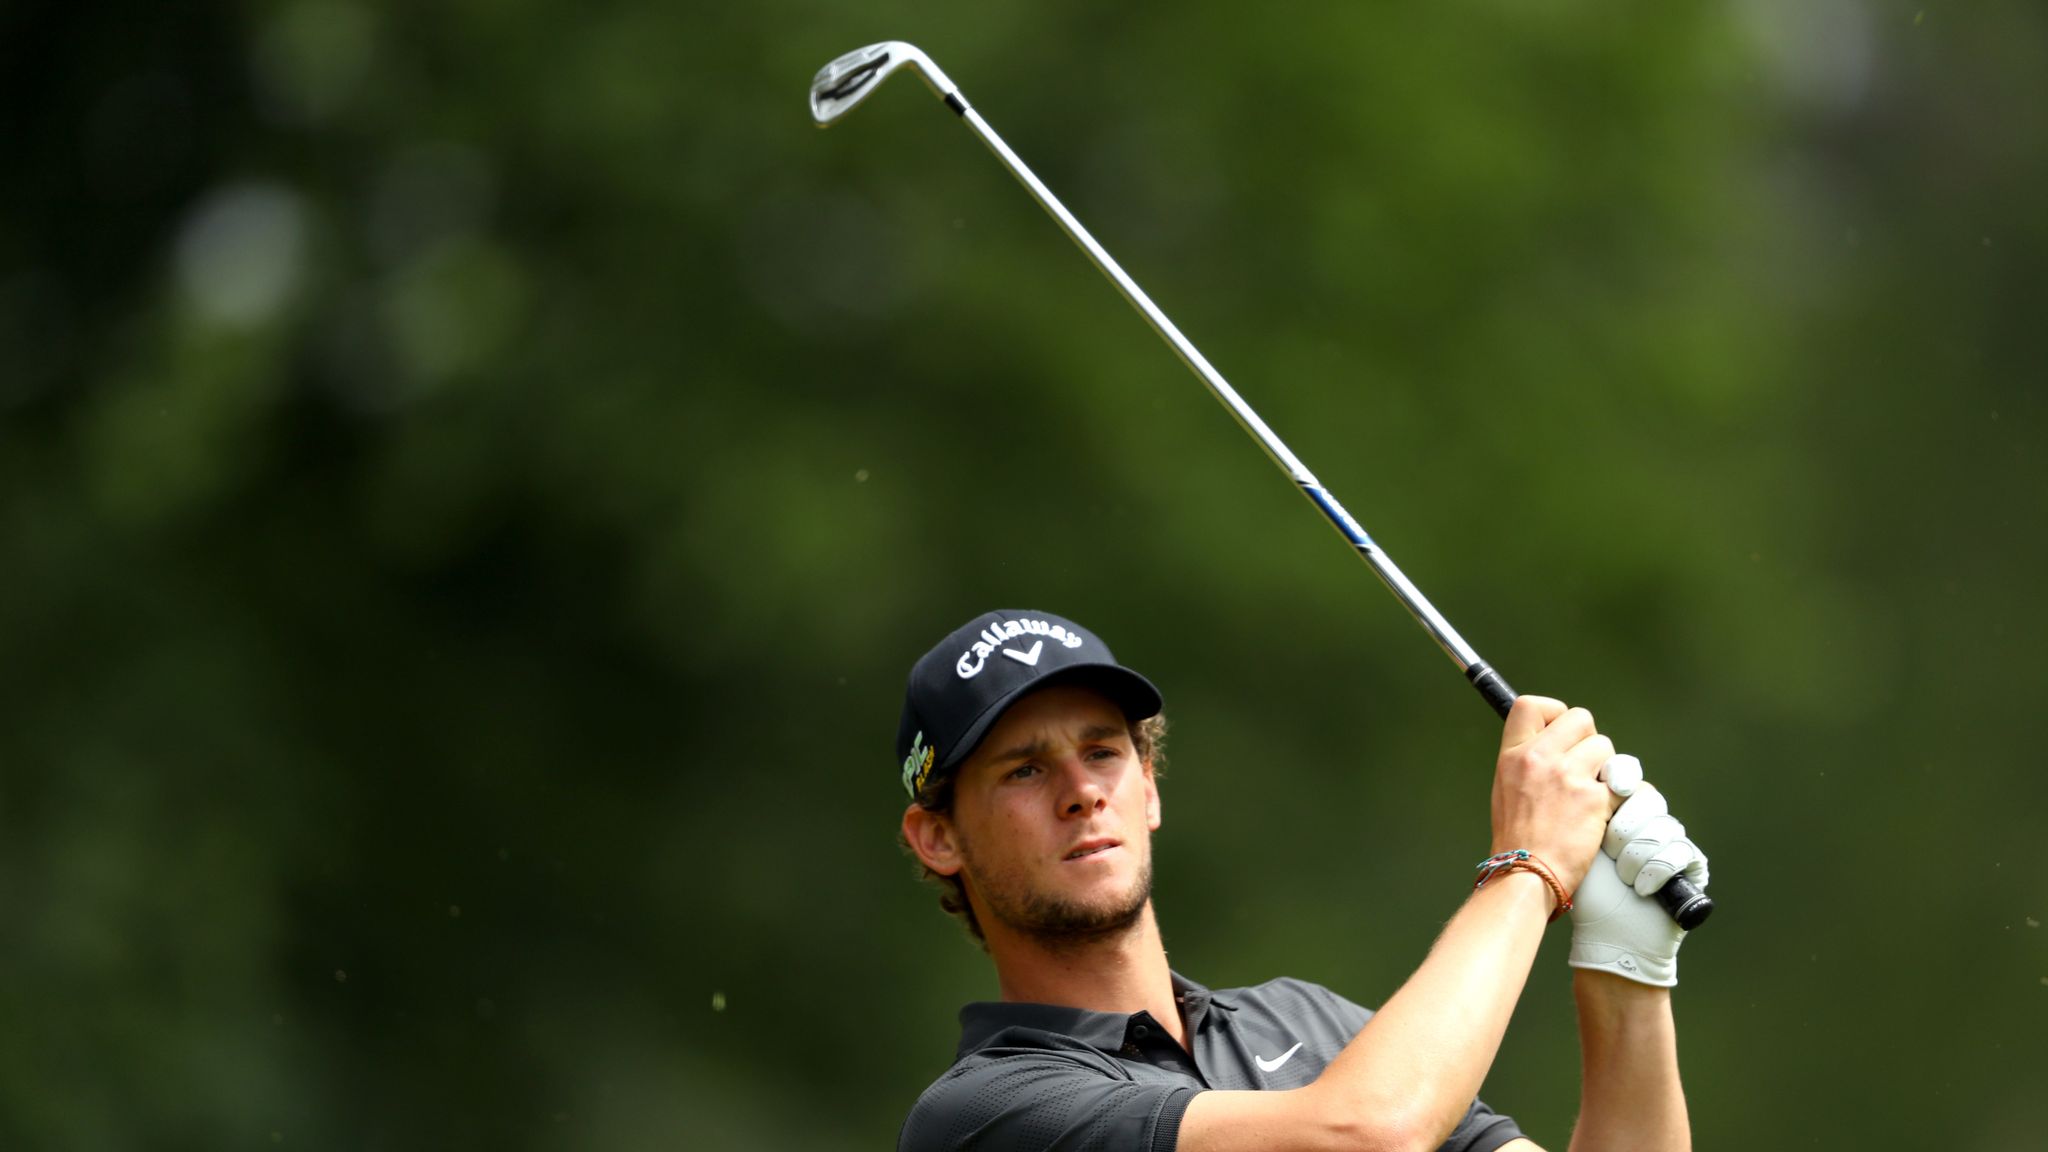 Flipboard: Thomas Pieters plays final round of Italian Open in under two hours